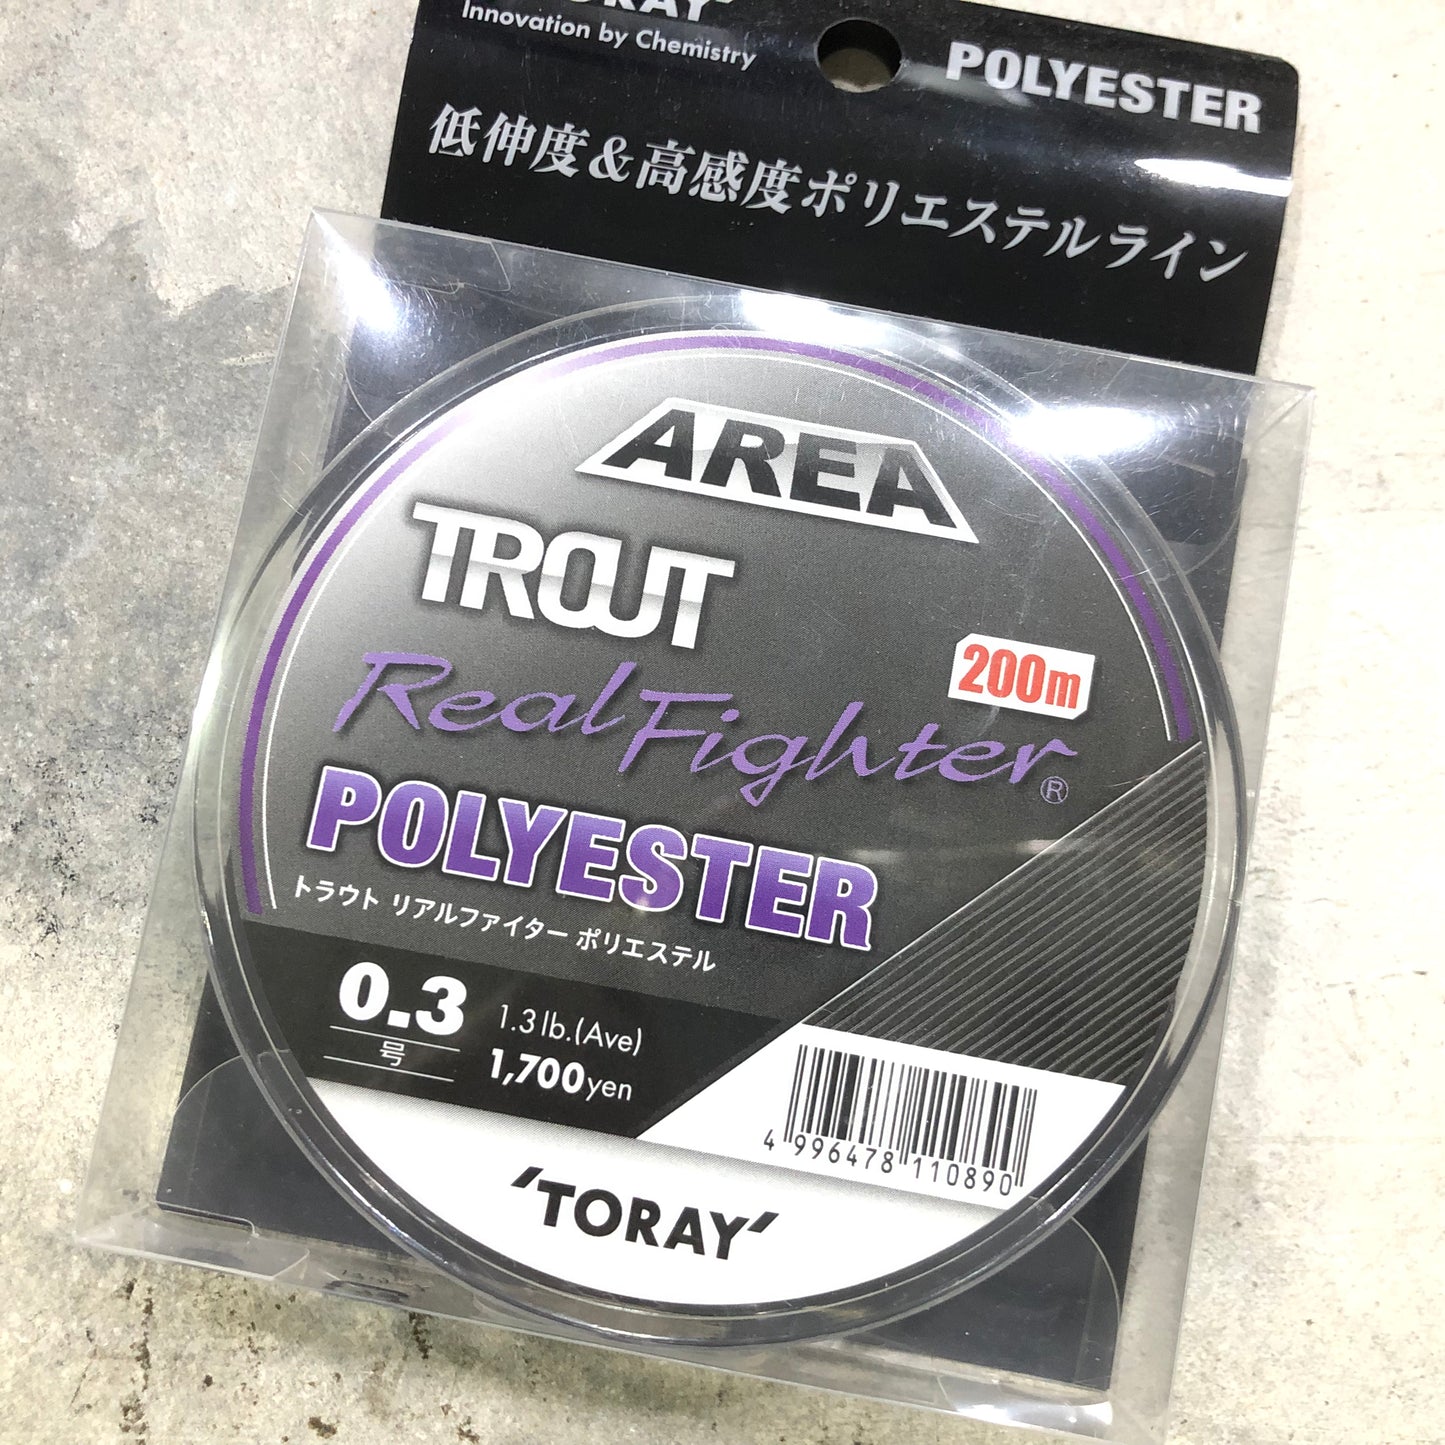 Trout Real Fighter Polyester 200M